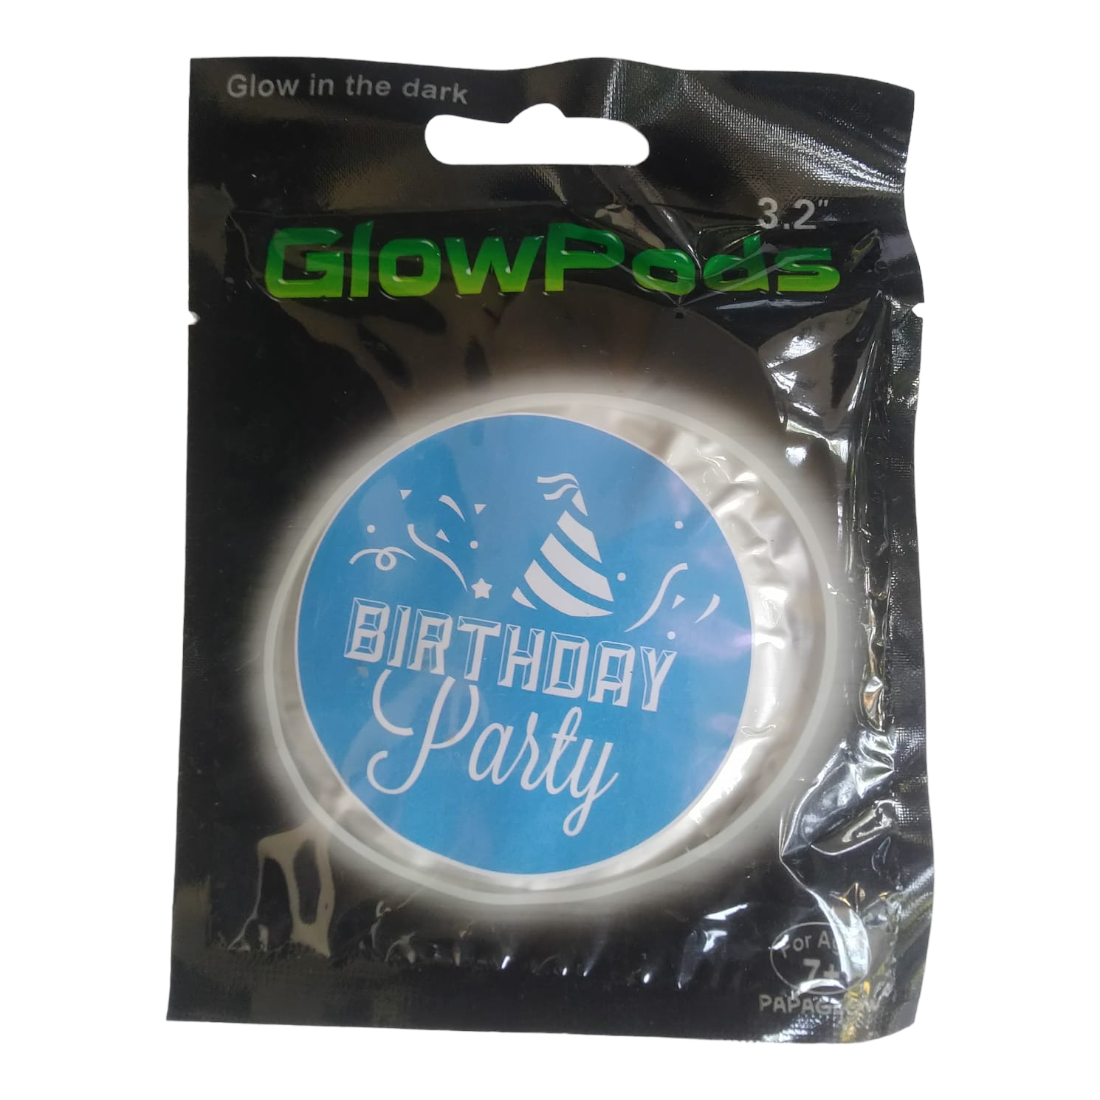 Glow Pods For Kids | Glowing LED Lights Inside - For Kids party & Birthday Return Gifts (Pack of 10) - Apkamart